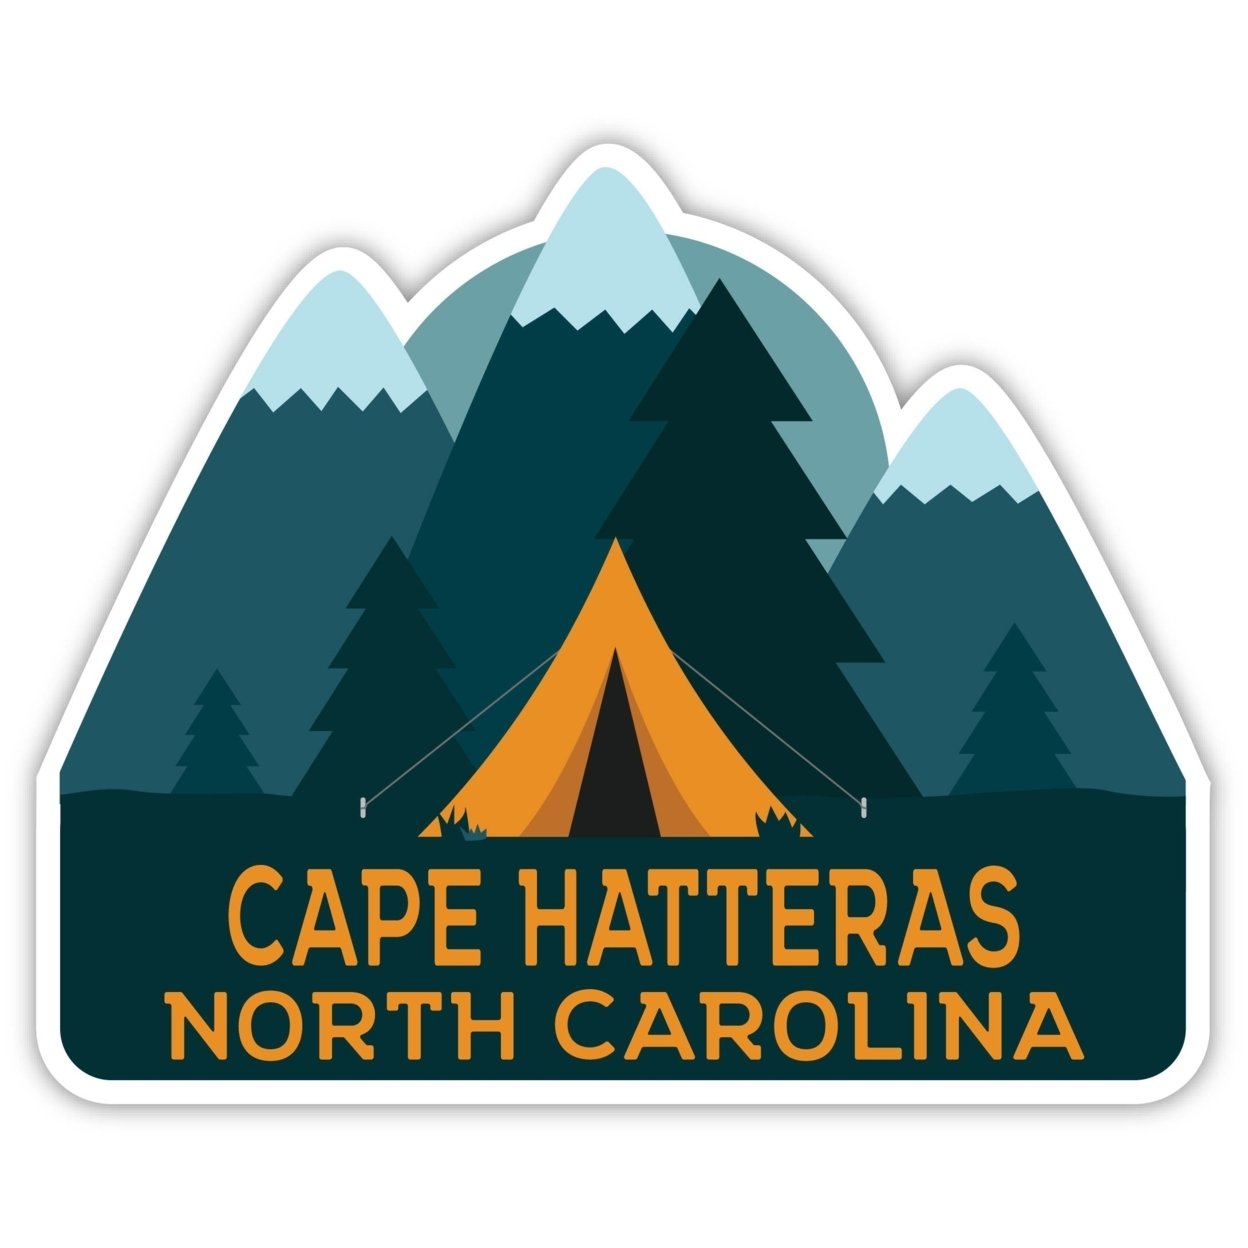 Cape Hatteras North Carolina Souvenir Decorative Stickers (Choose Theme And Size) - 4-Pack, 6-Inch, Tent